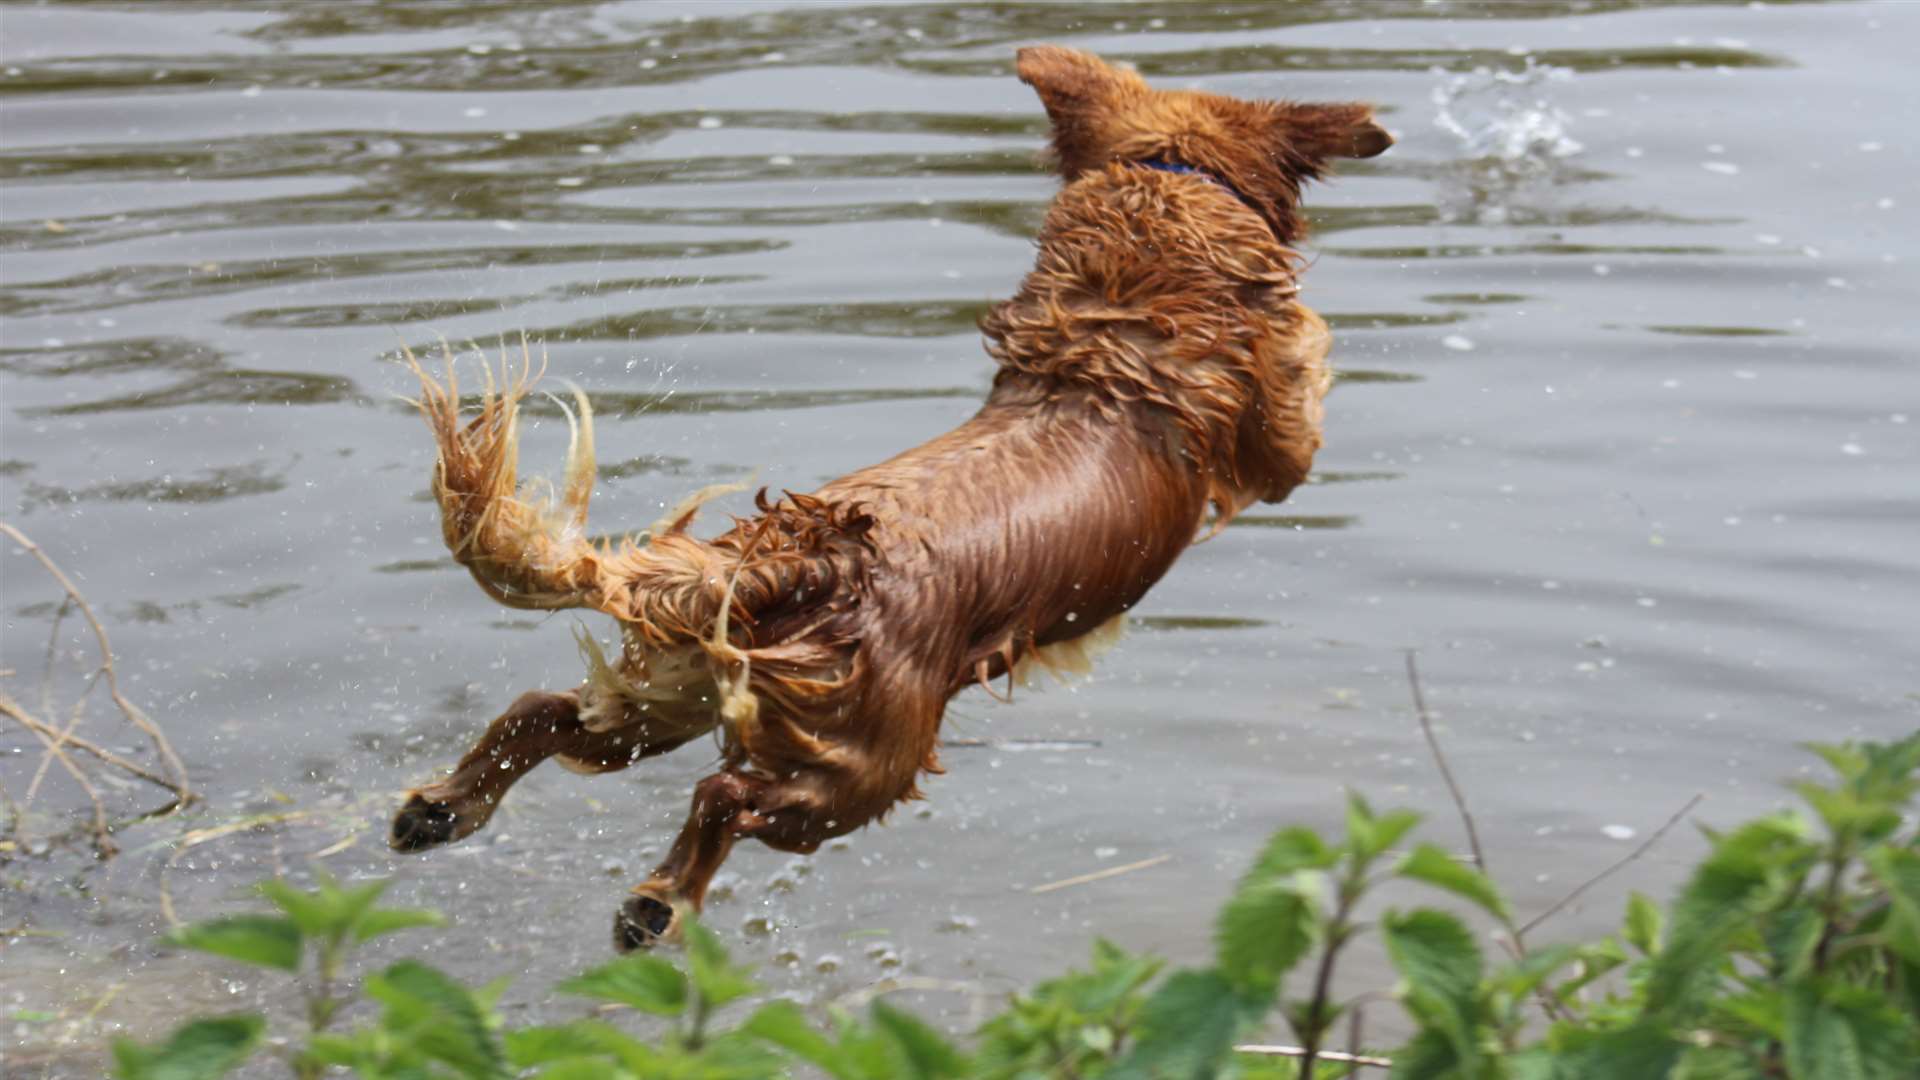 Jump in to a dog walk. Picture: Elaine Beal